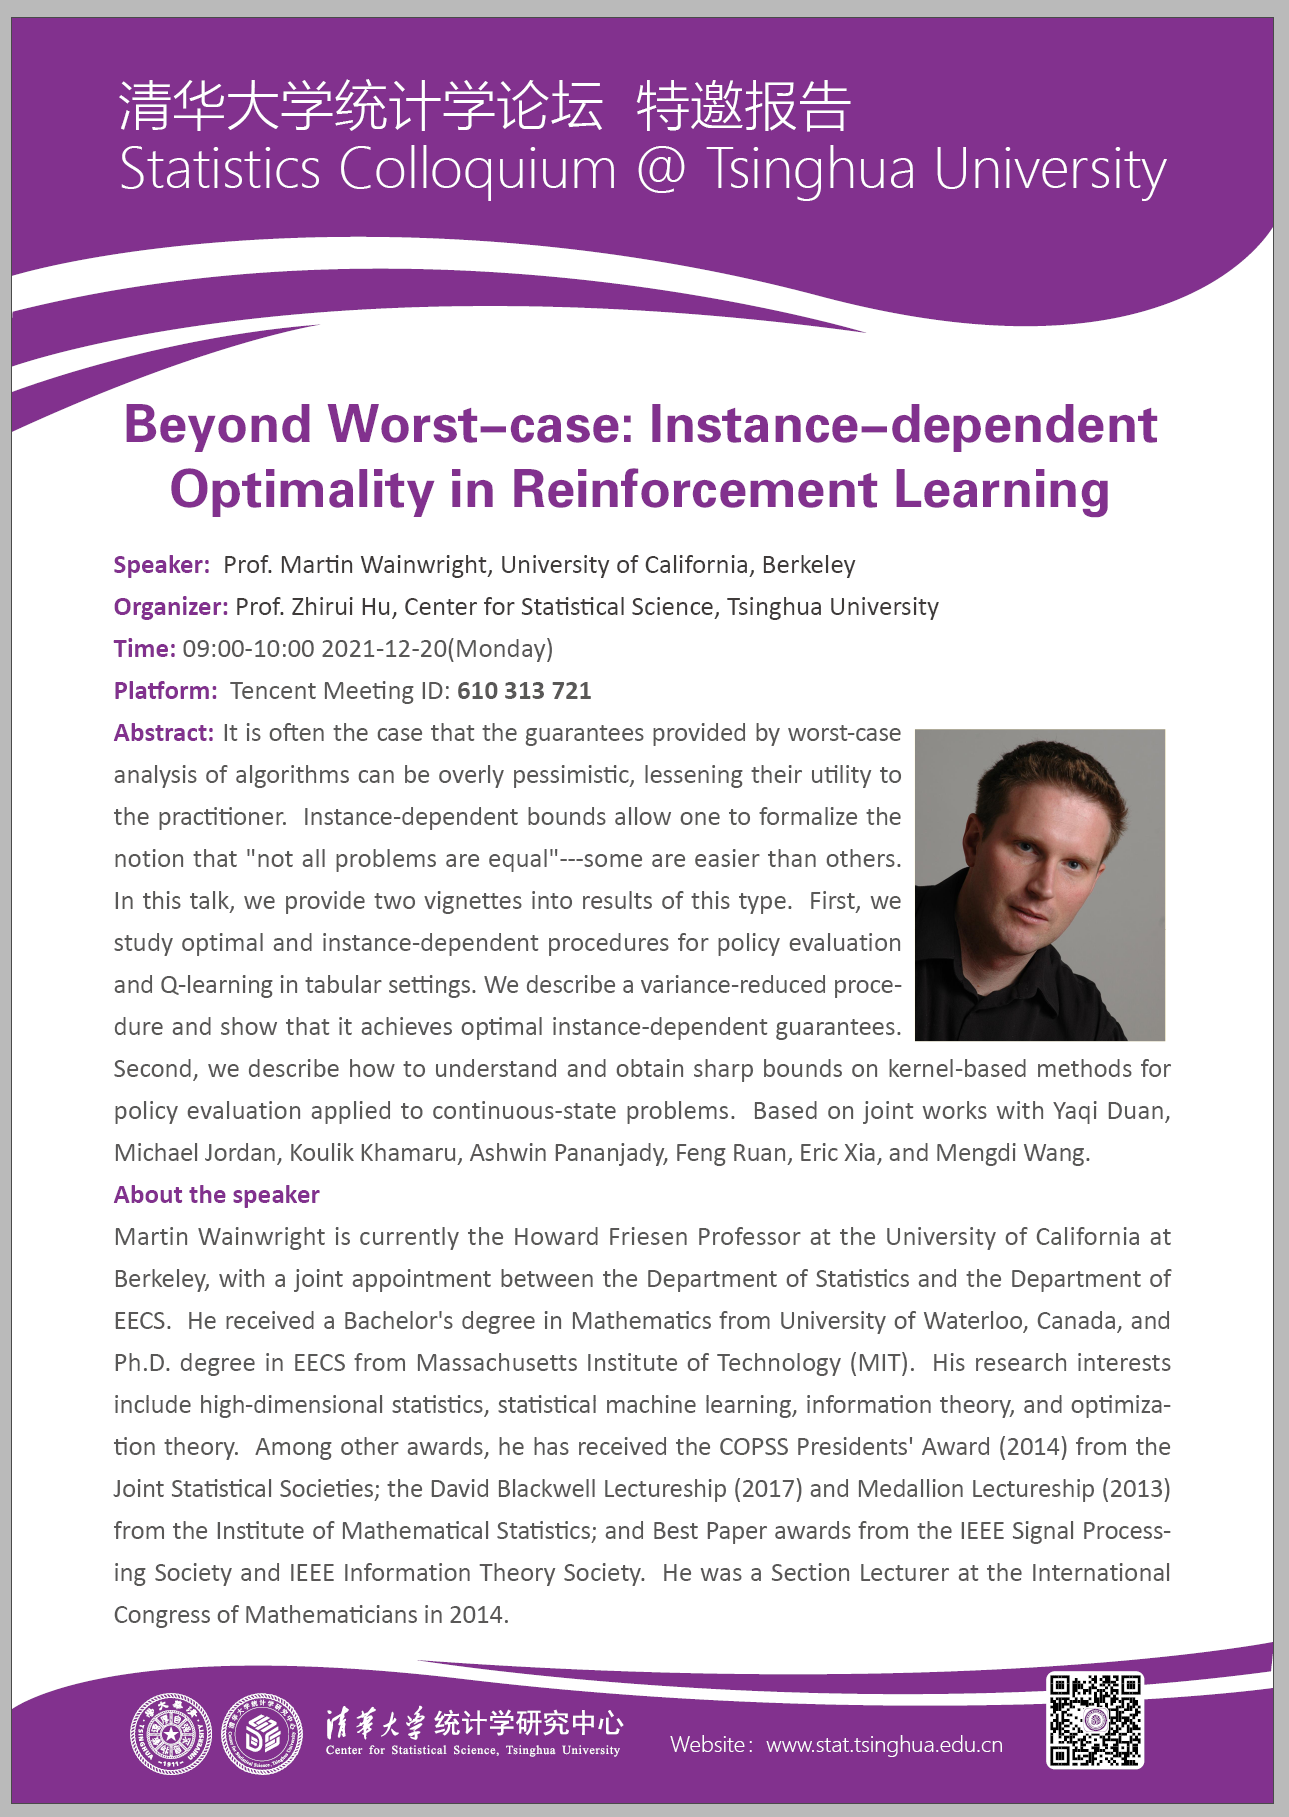 Beyond Worst-case: Instance-dependent Optimality in Reinforcement Learning